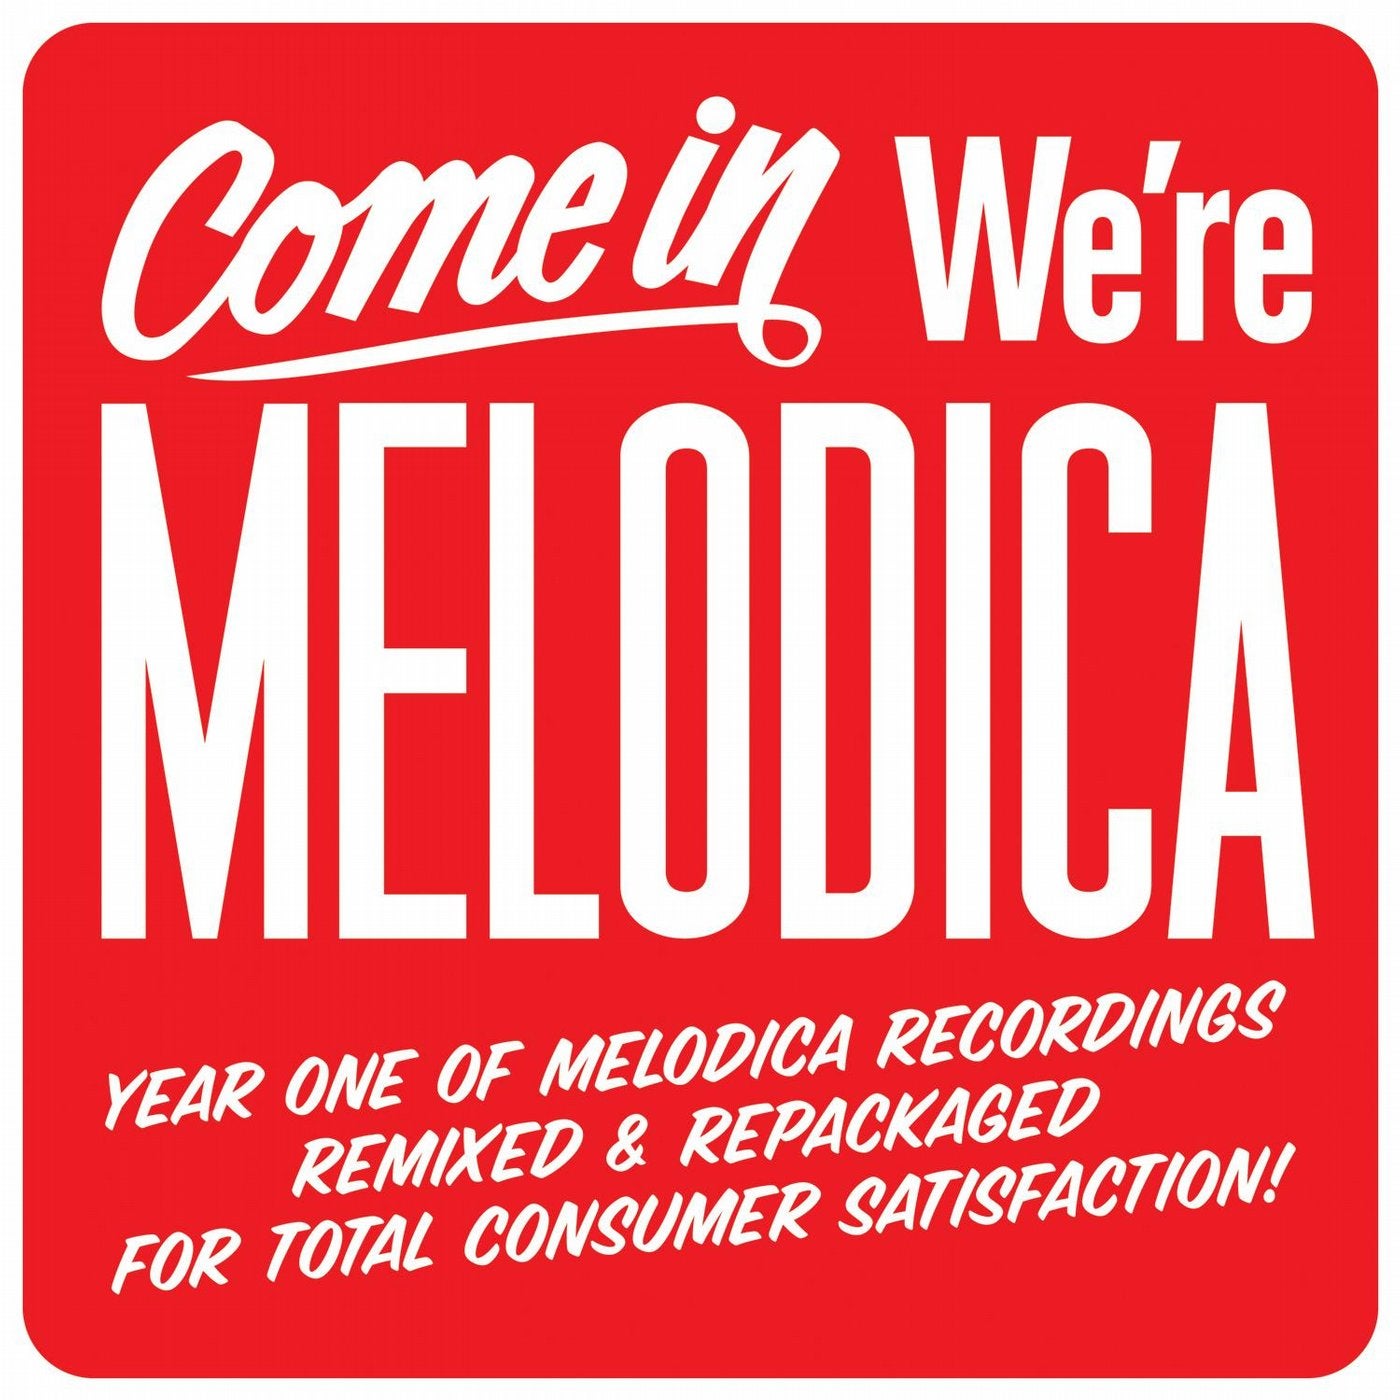 Come In We're Melodica